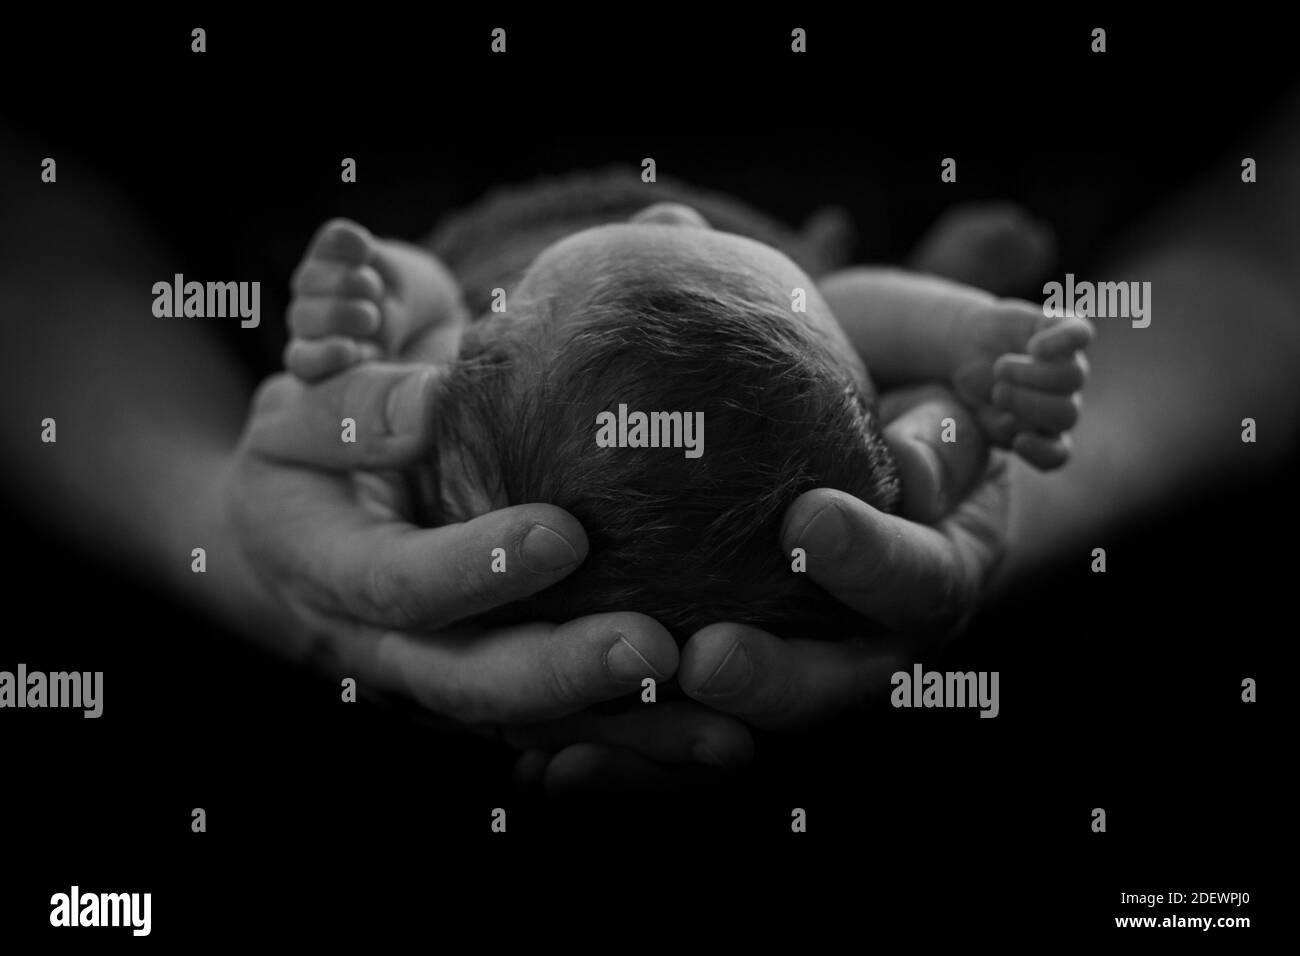 father's hands holding his newborn bab Stock Photo